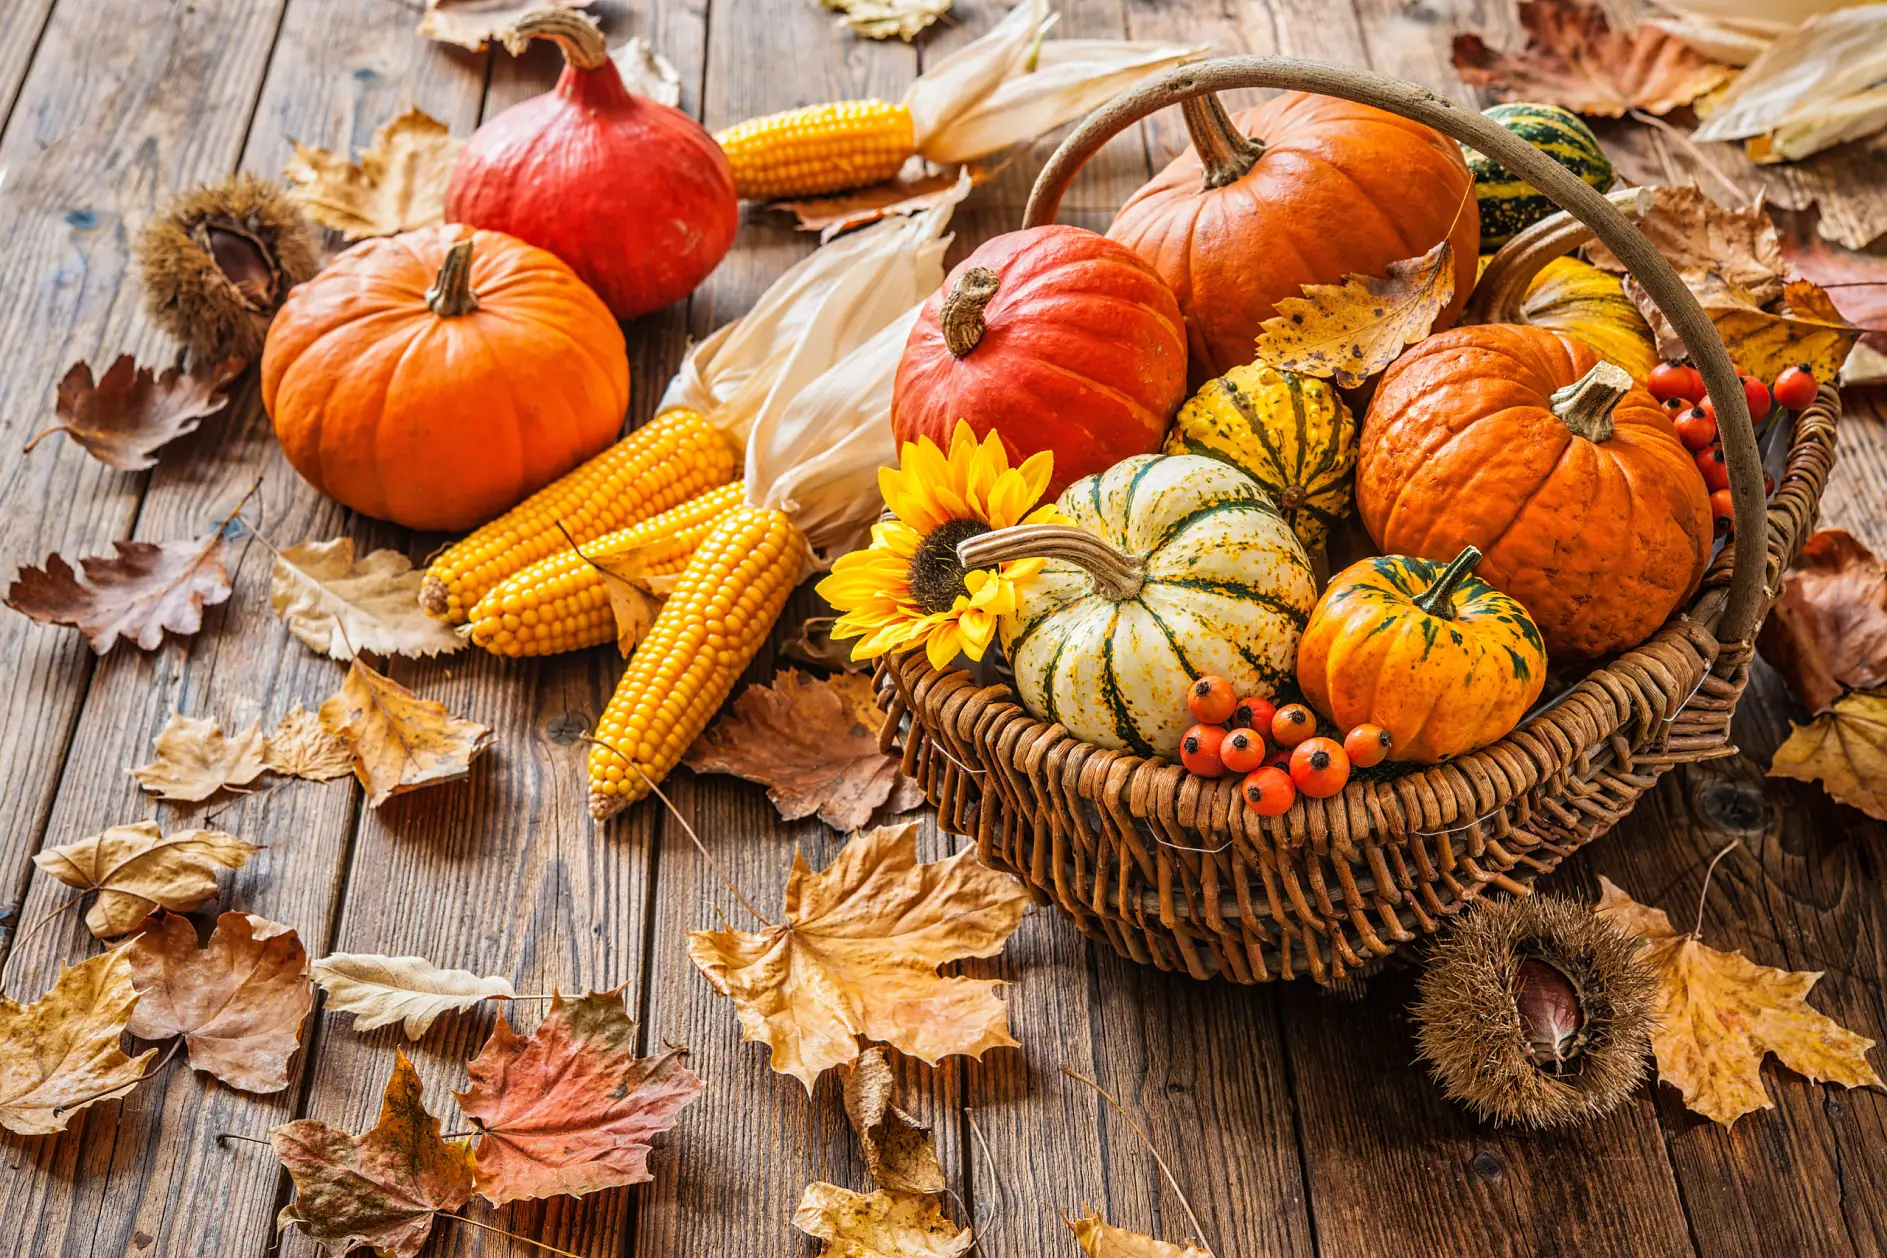 Autumn Decoration with Pumpkins, Corncobs and Leaves